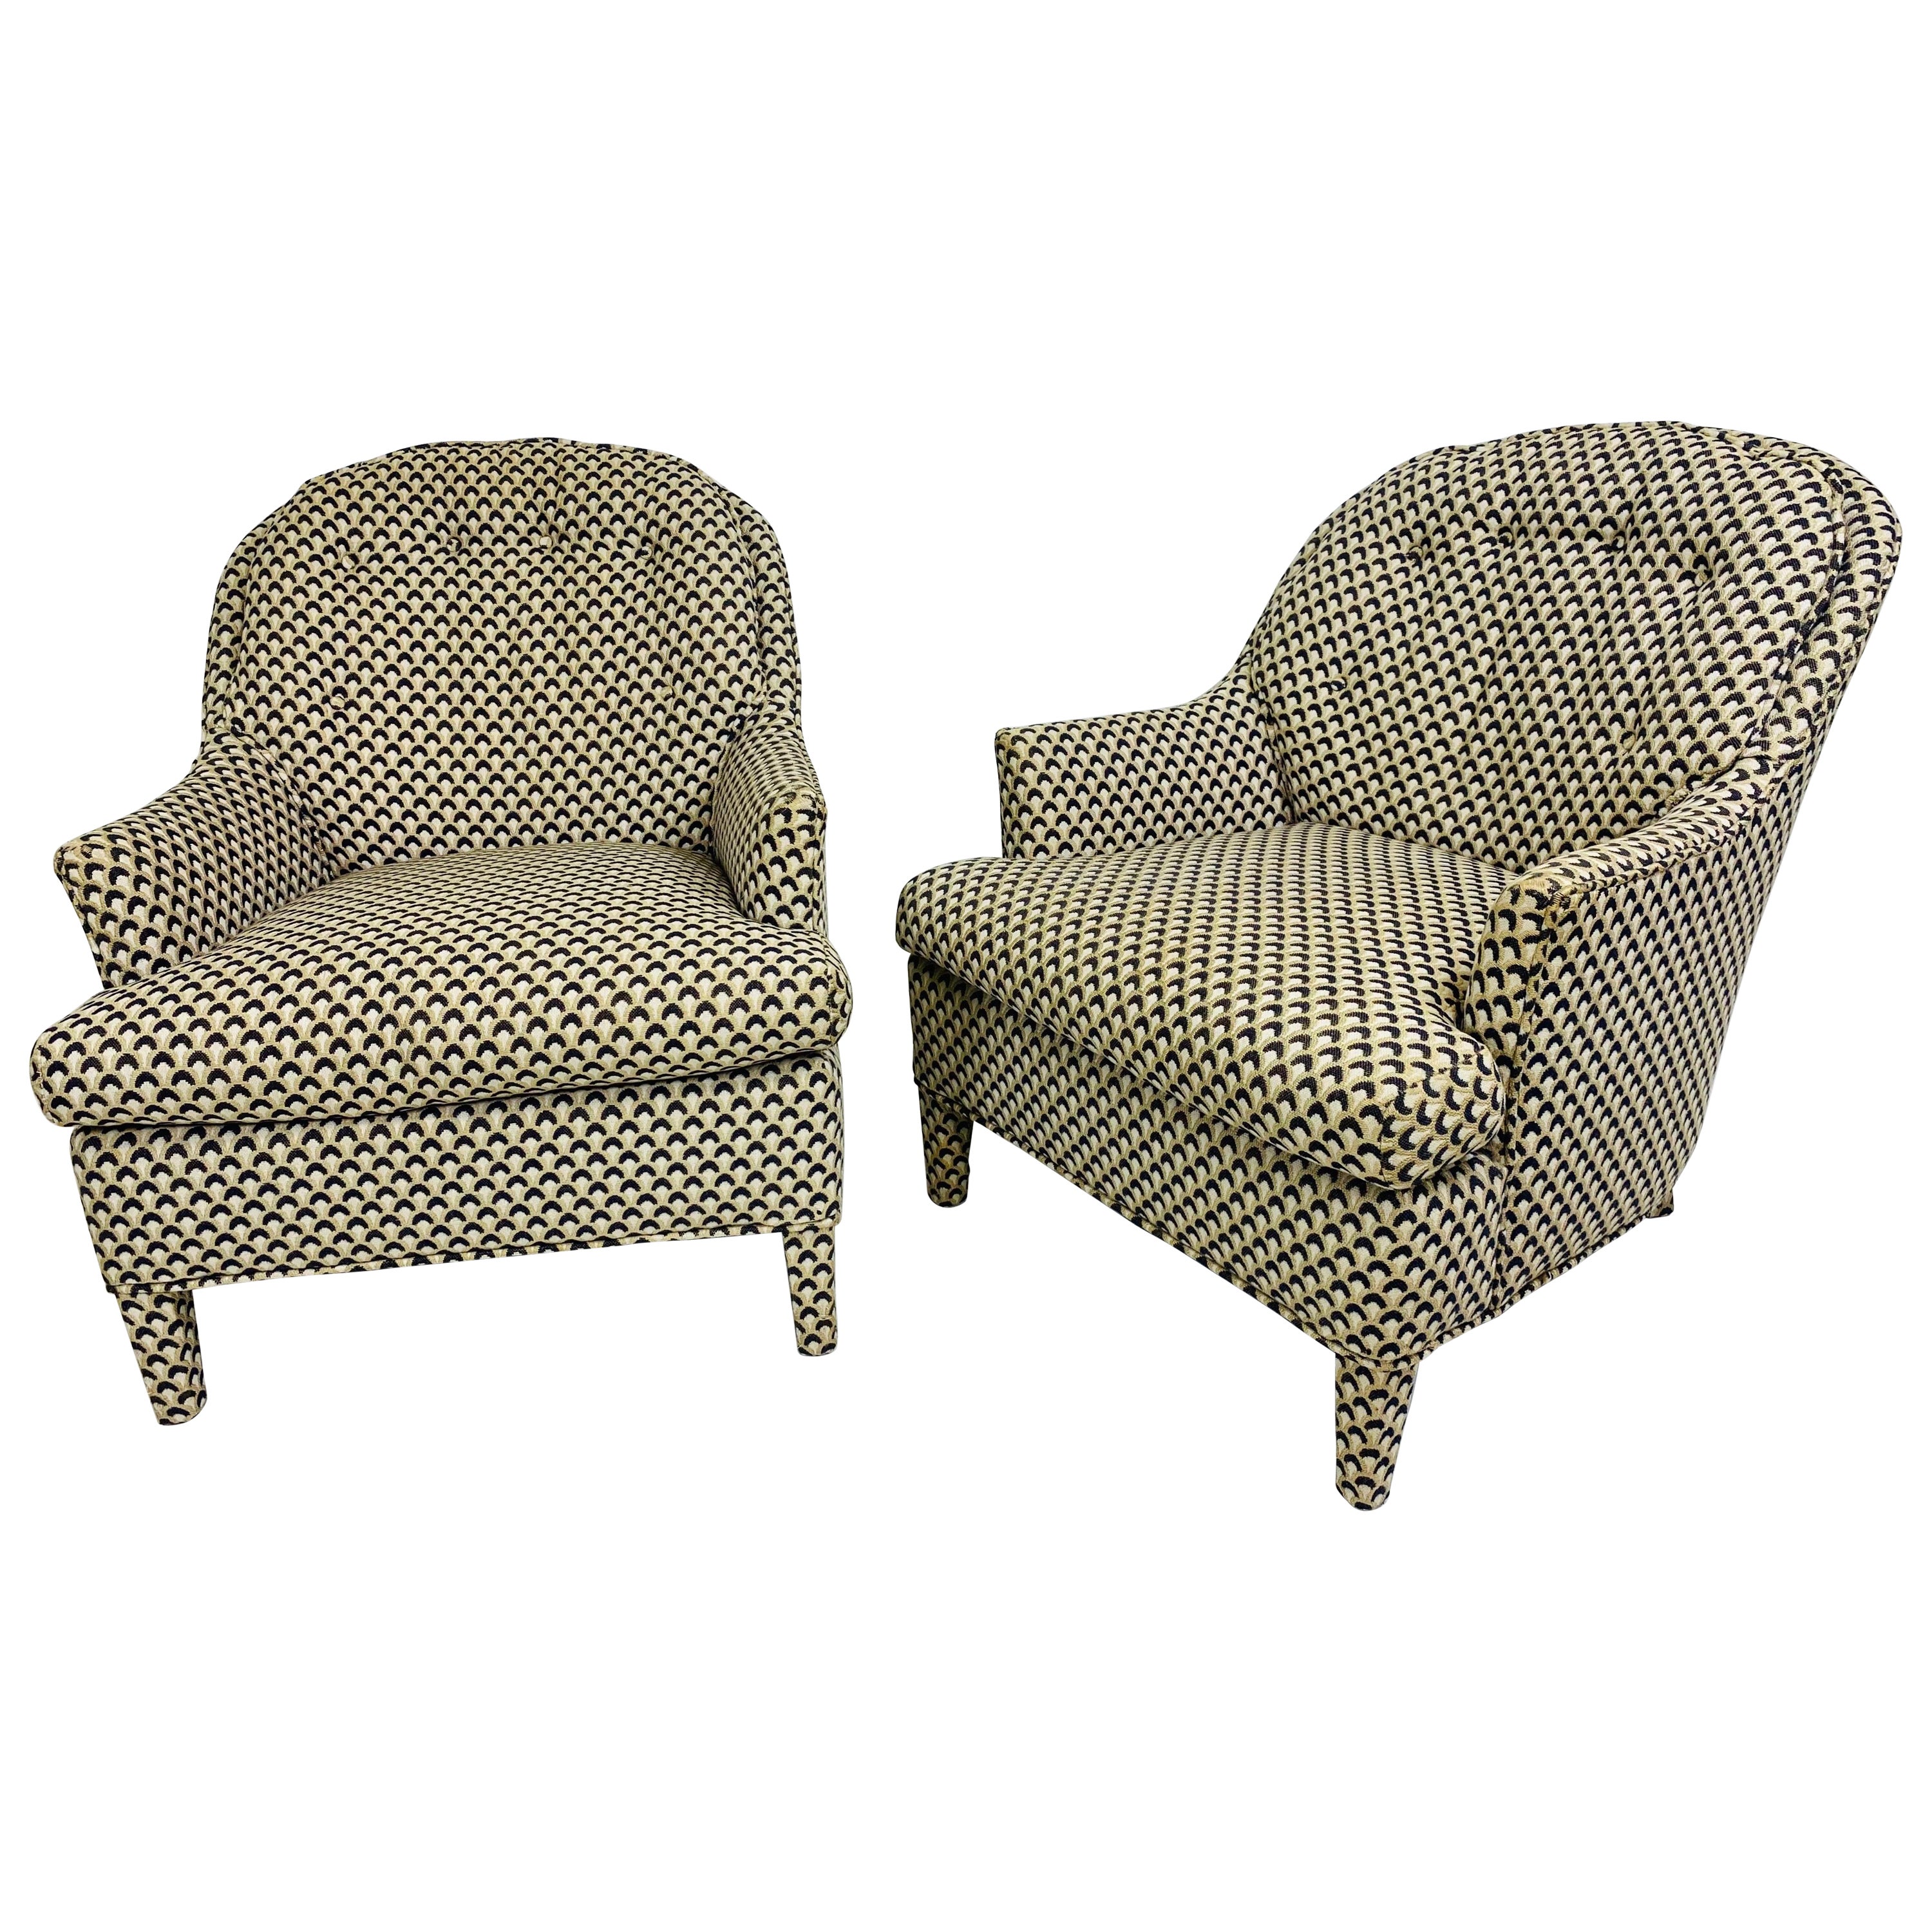 Mid century vintage modern upholstered club chairs after Milo Baughman